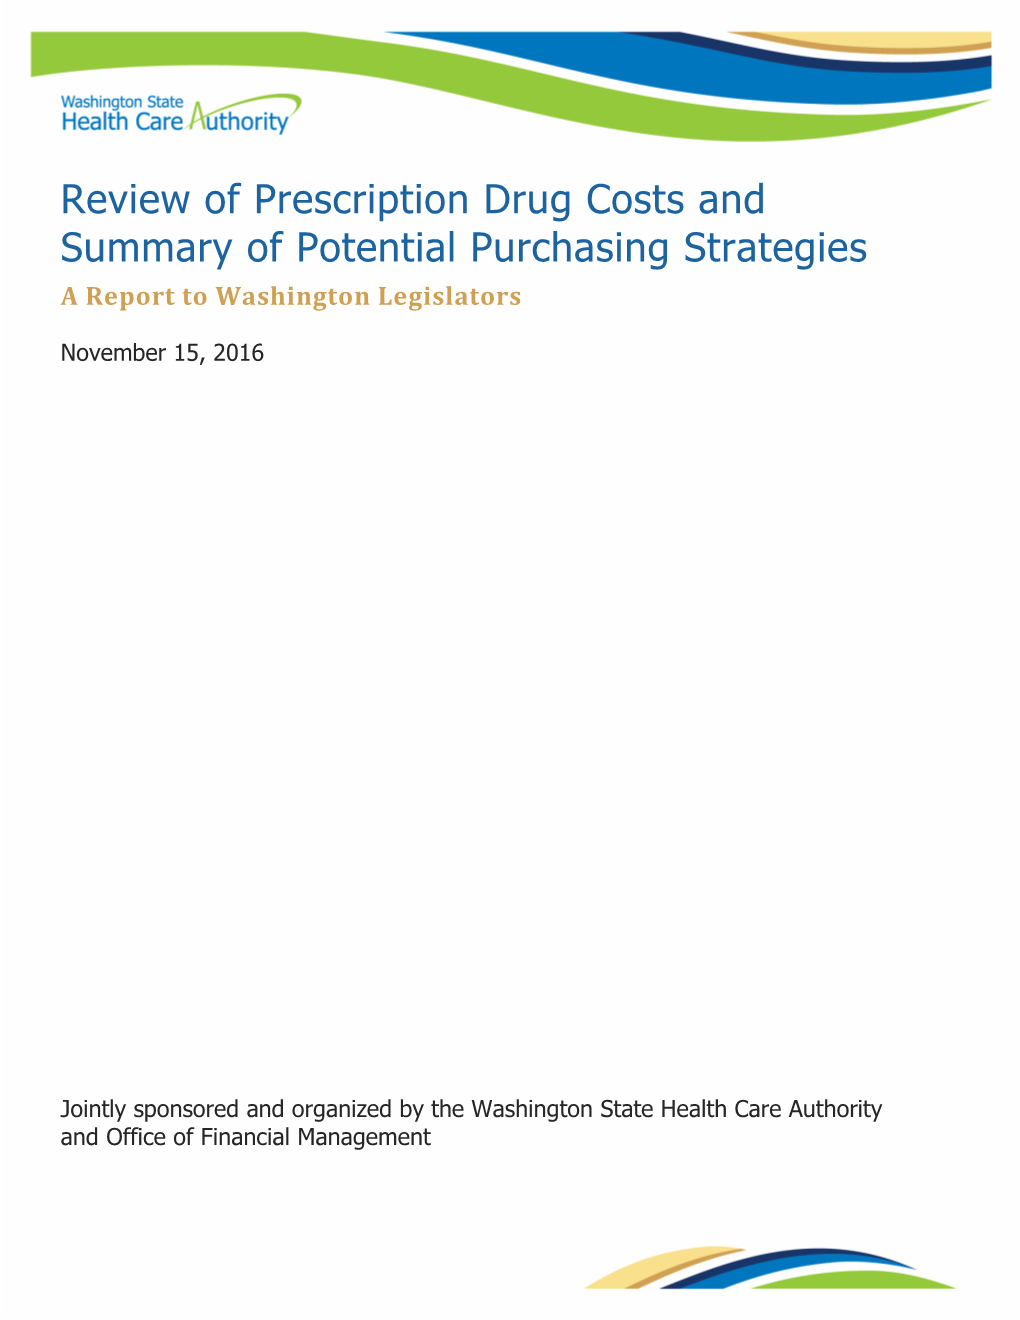 Review of Prescription Drug Costs and Summary of Potential Purchasing Strategies a Report to Washington Legislators